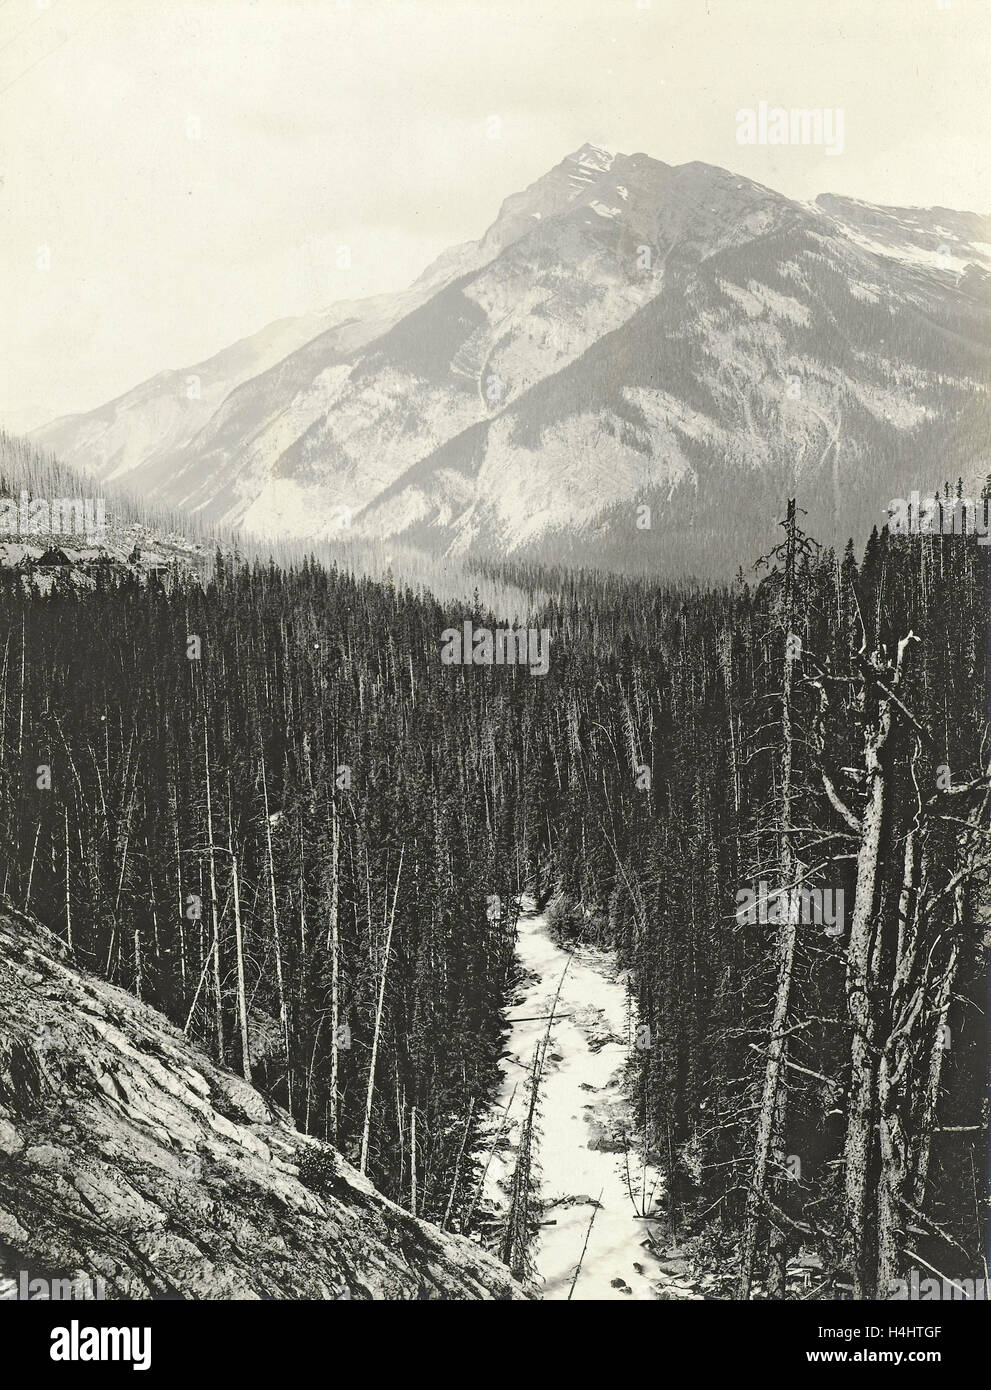 View over Kicking Horse Canyon, attributed to William Notman Stock Photo